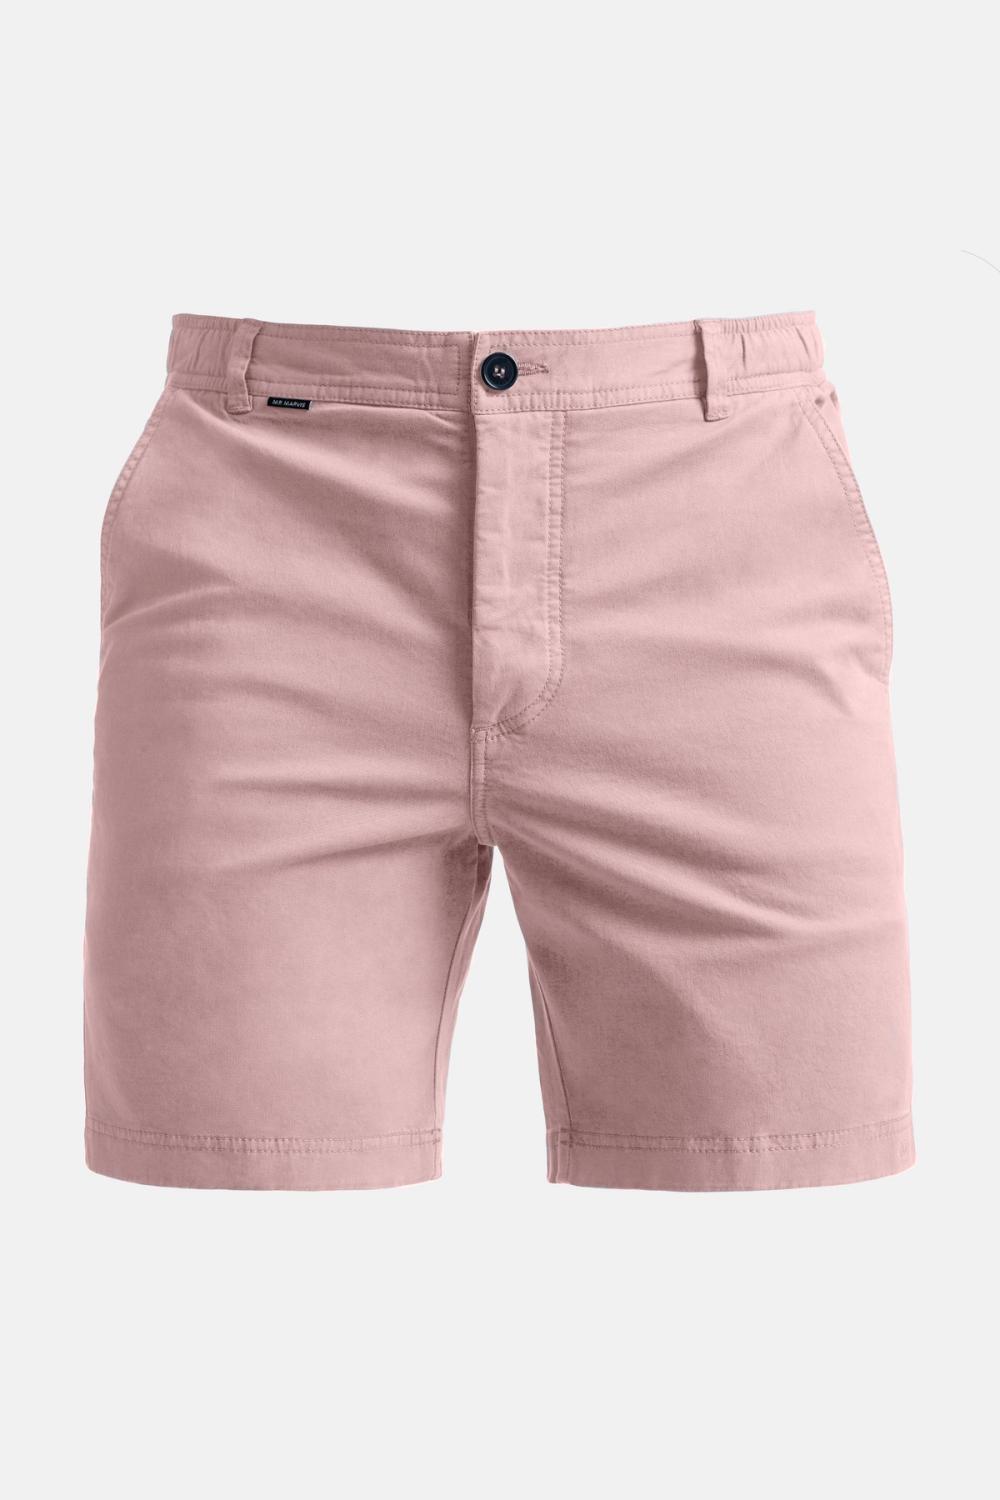 Pop of pink shorts